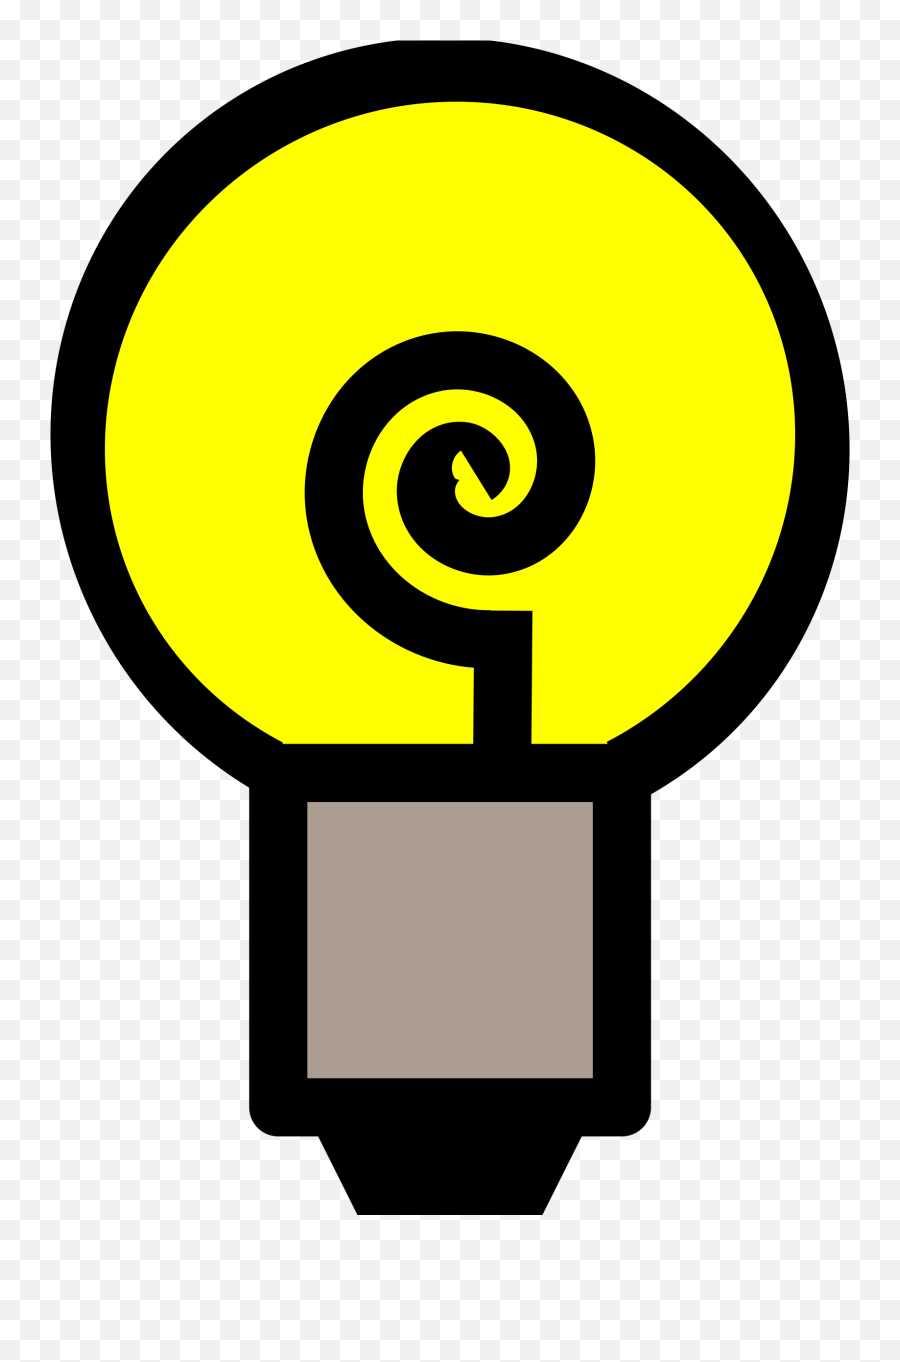 Download This Free Icons Png Design Of Traditional Lightbulb - Incandescent Light Bulb,Lightbulb Png